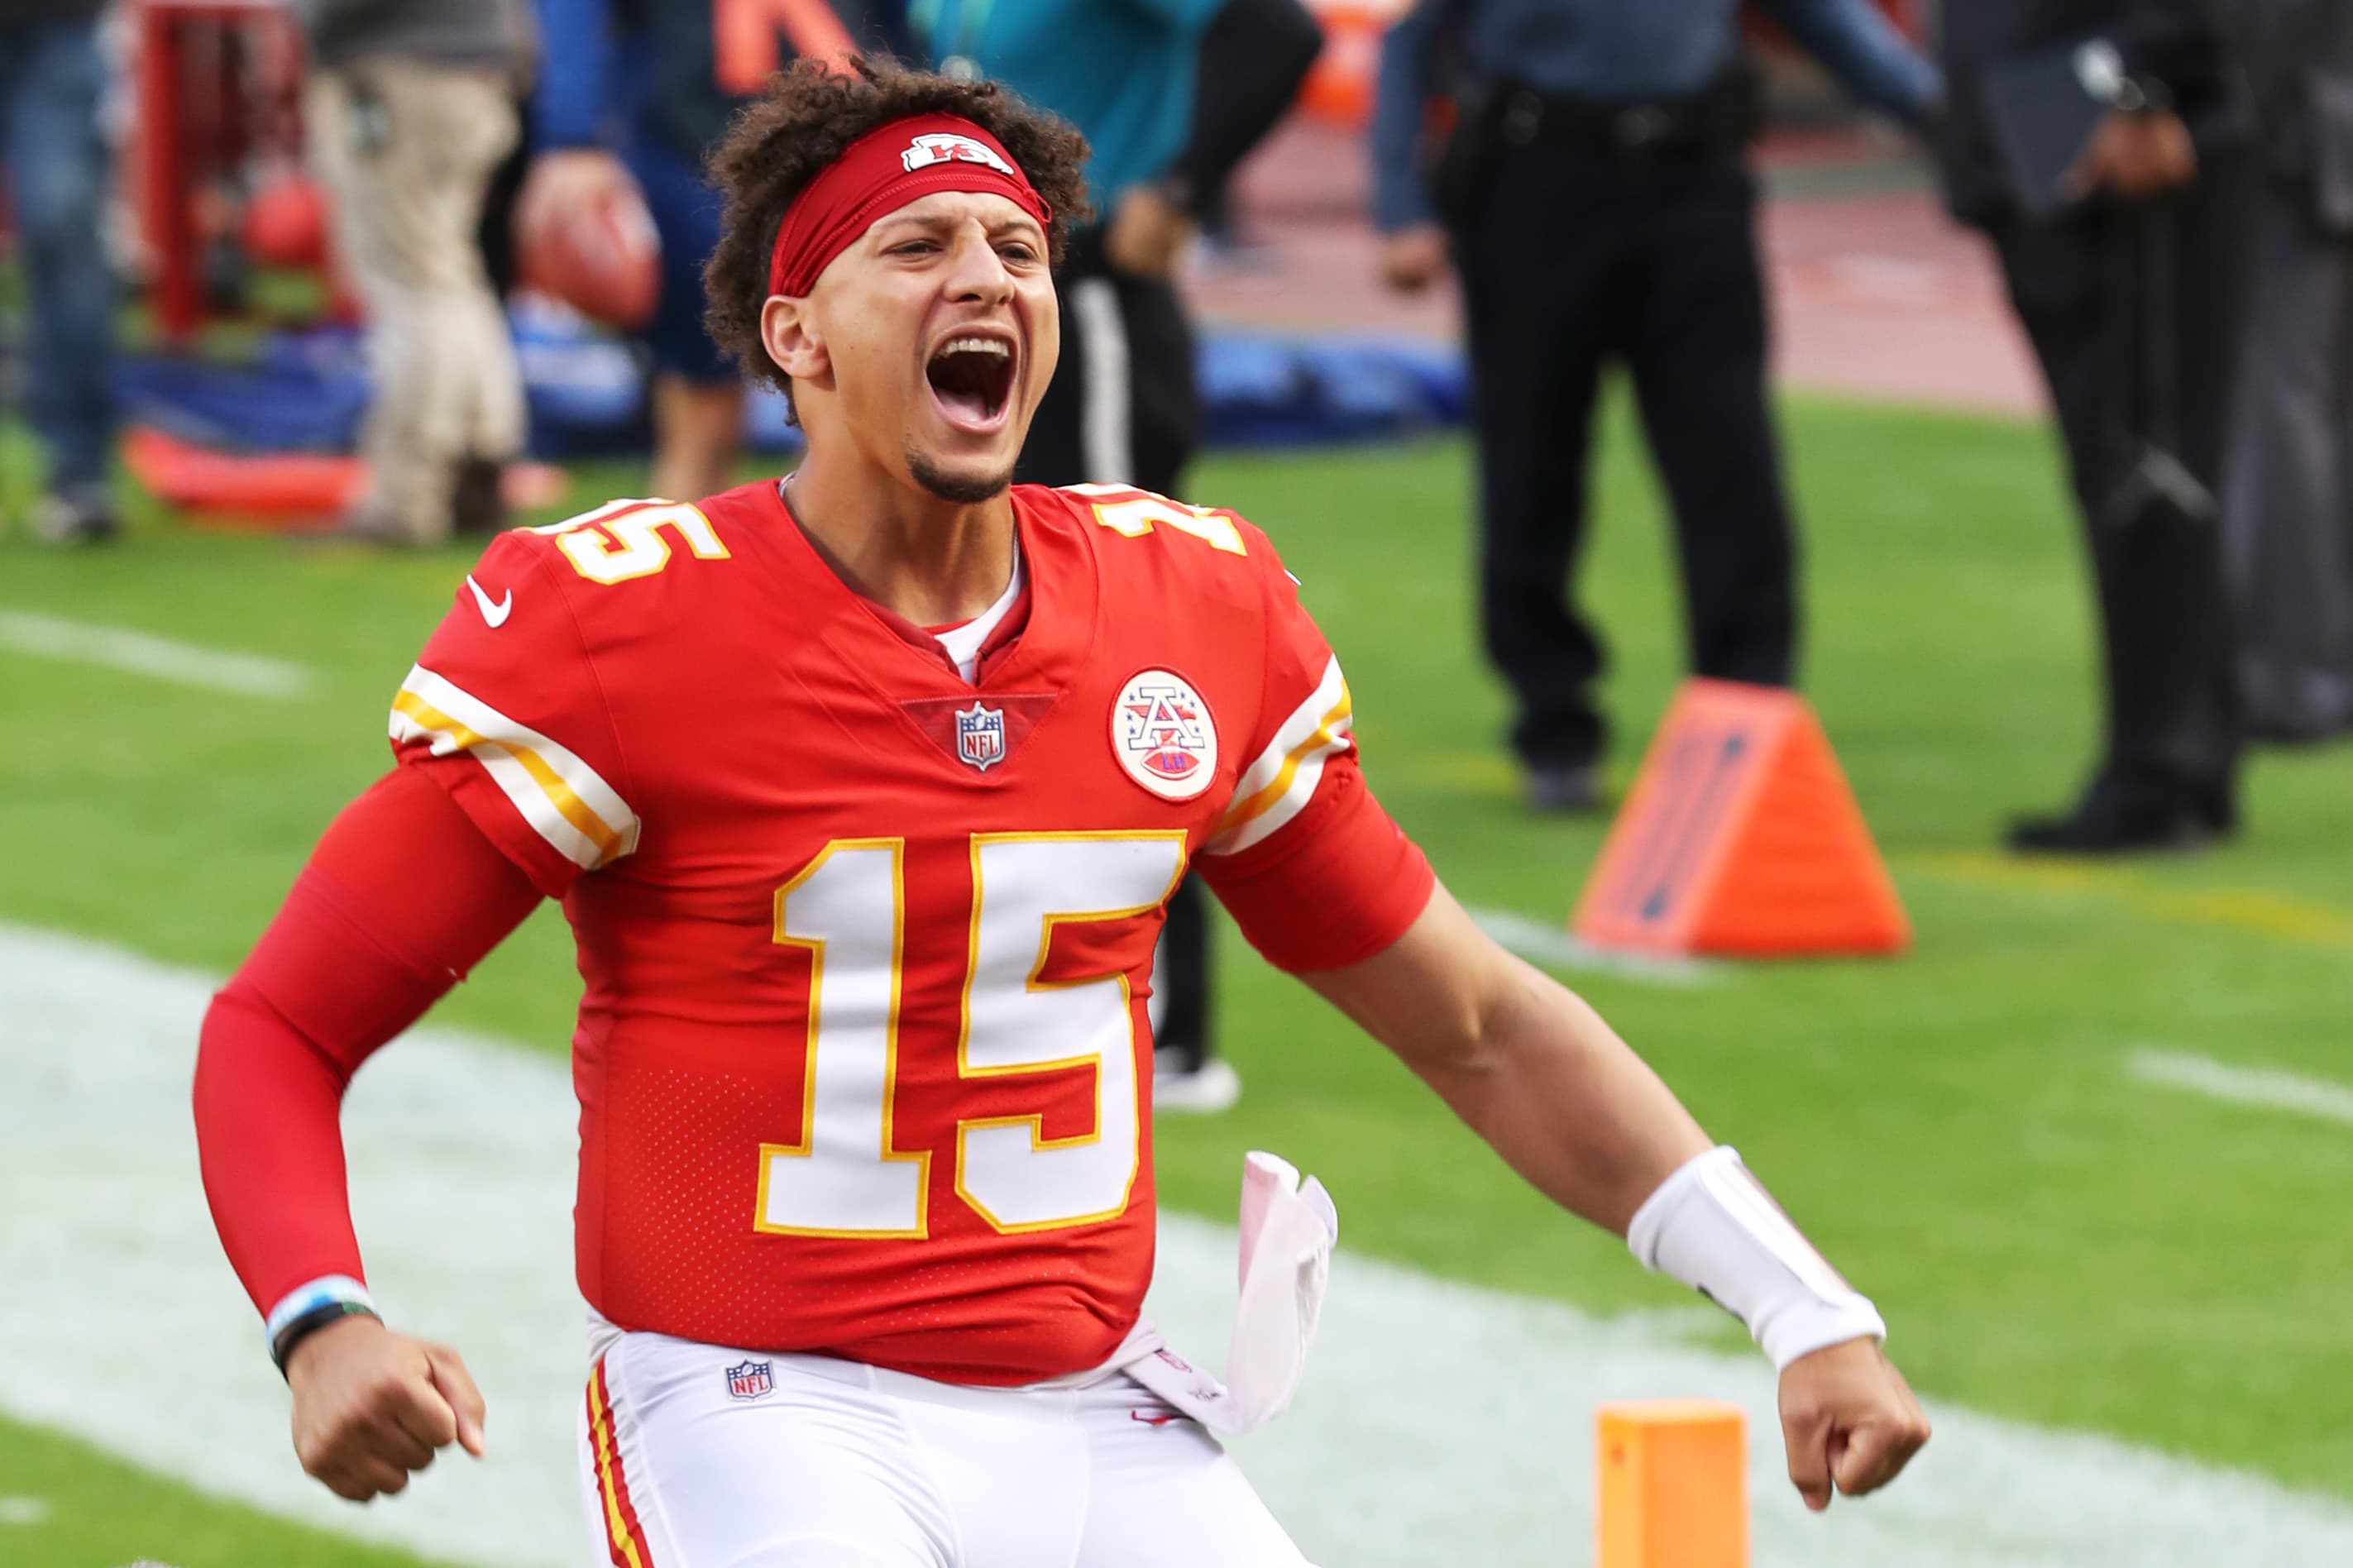 Patrick Mahomes' typical workout and eating habits